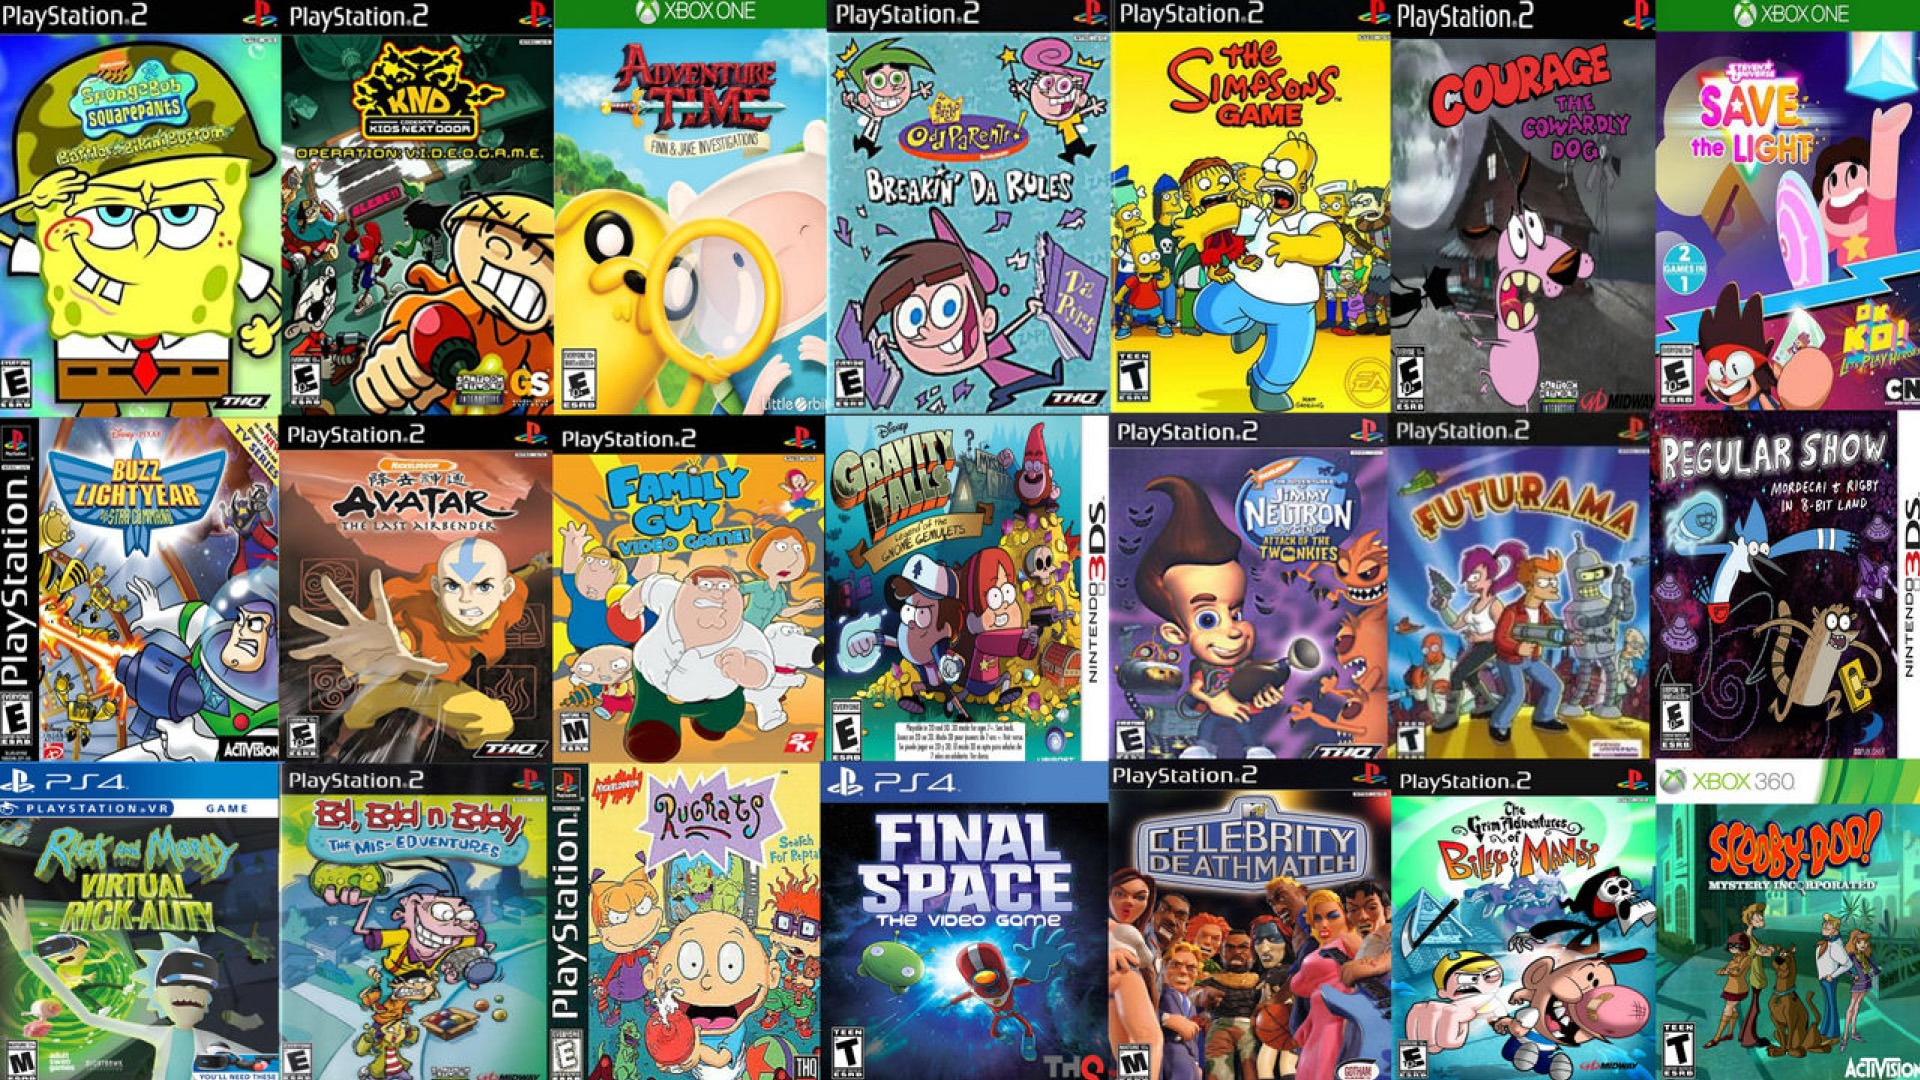 Video games based on cartoons